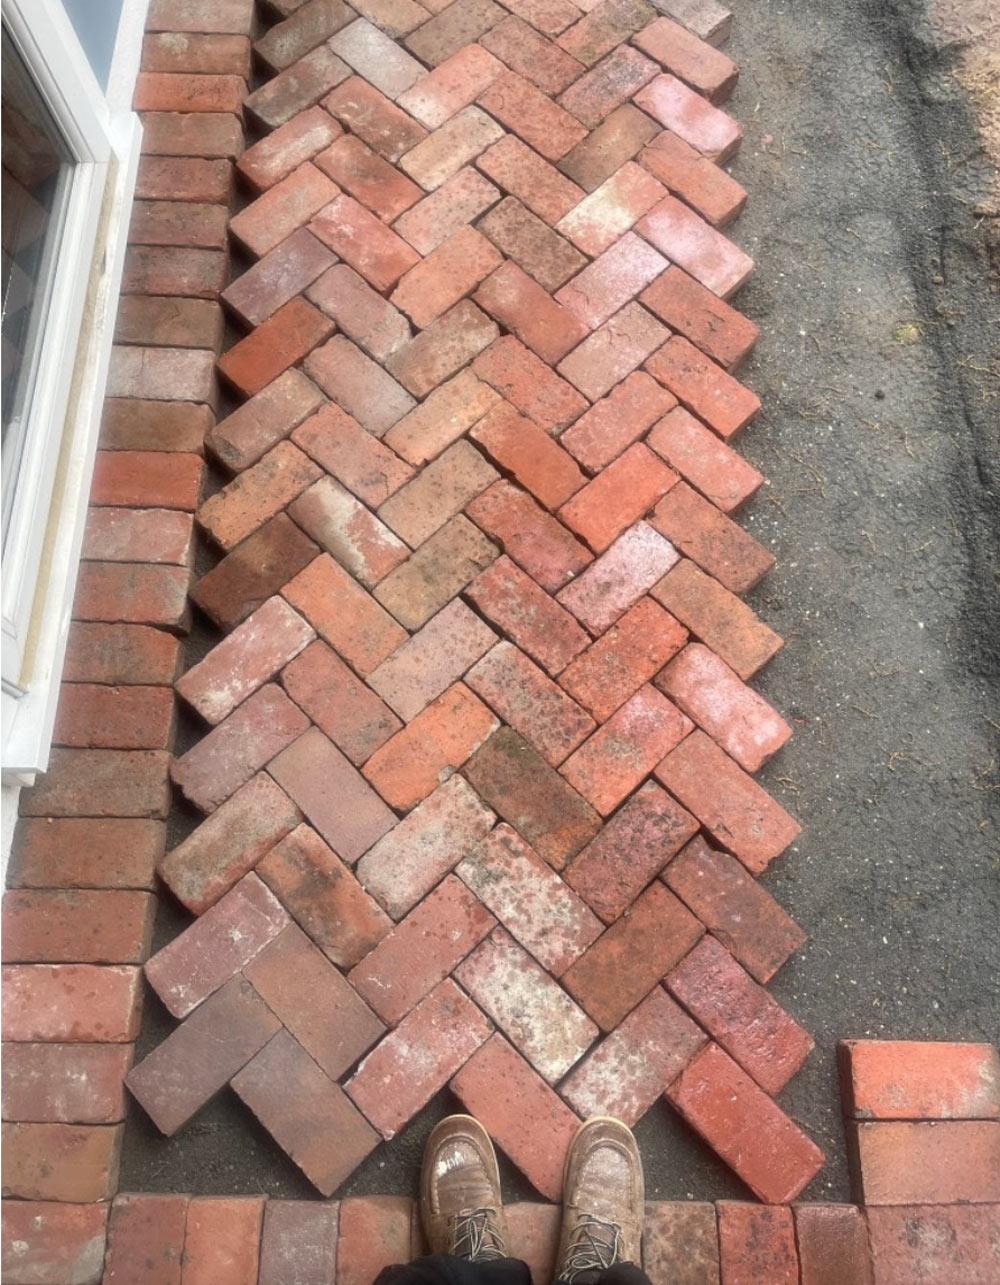 Bricks laid on the ground in a zig zag pattern. 